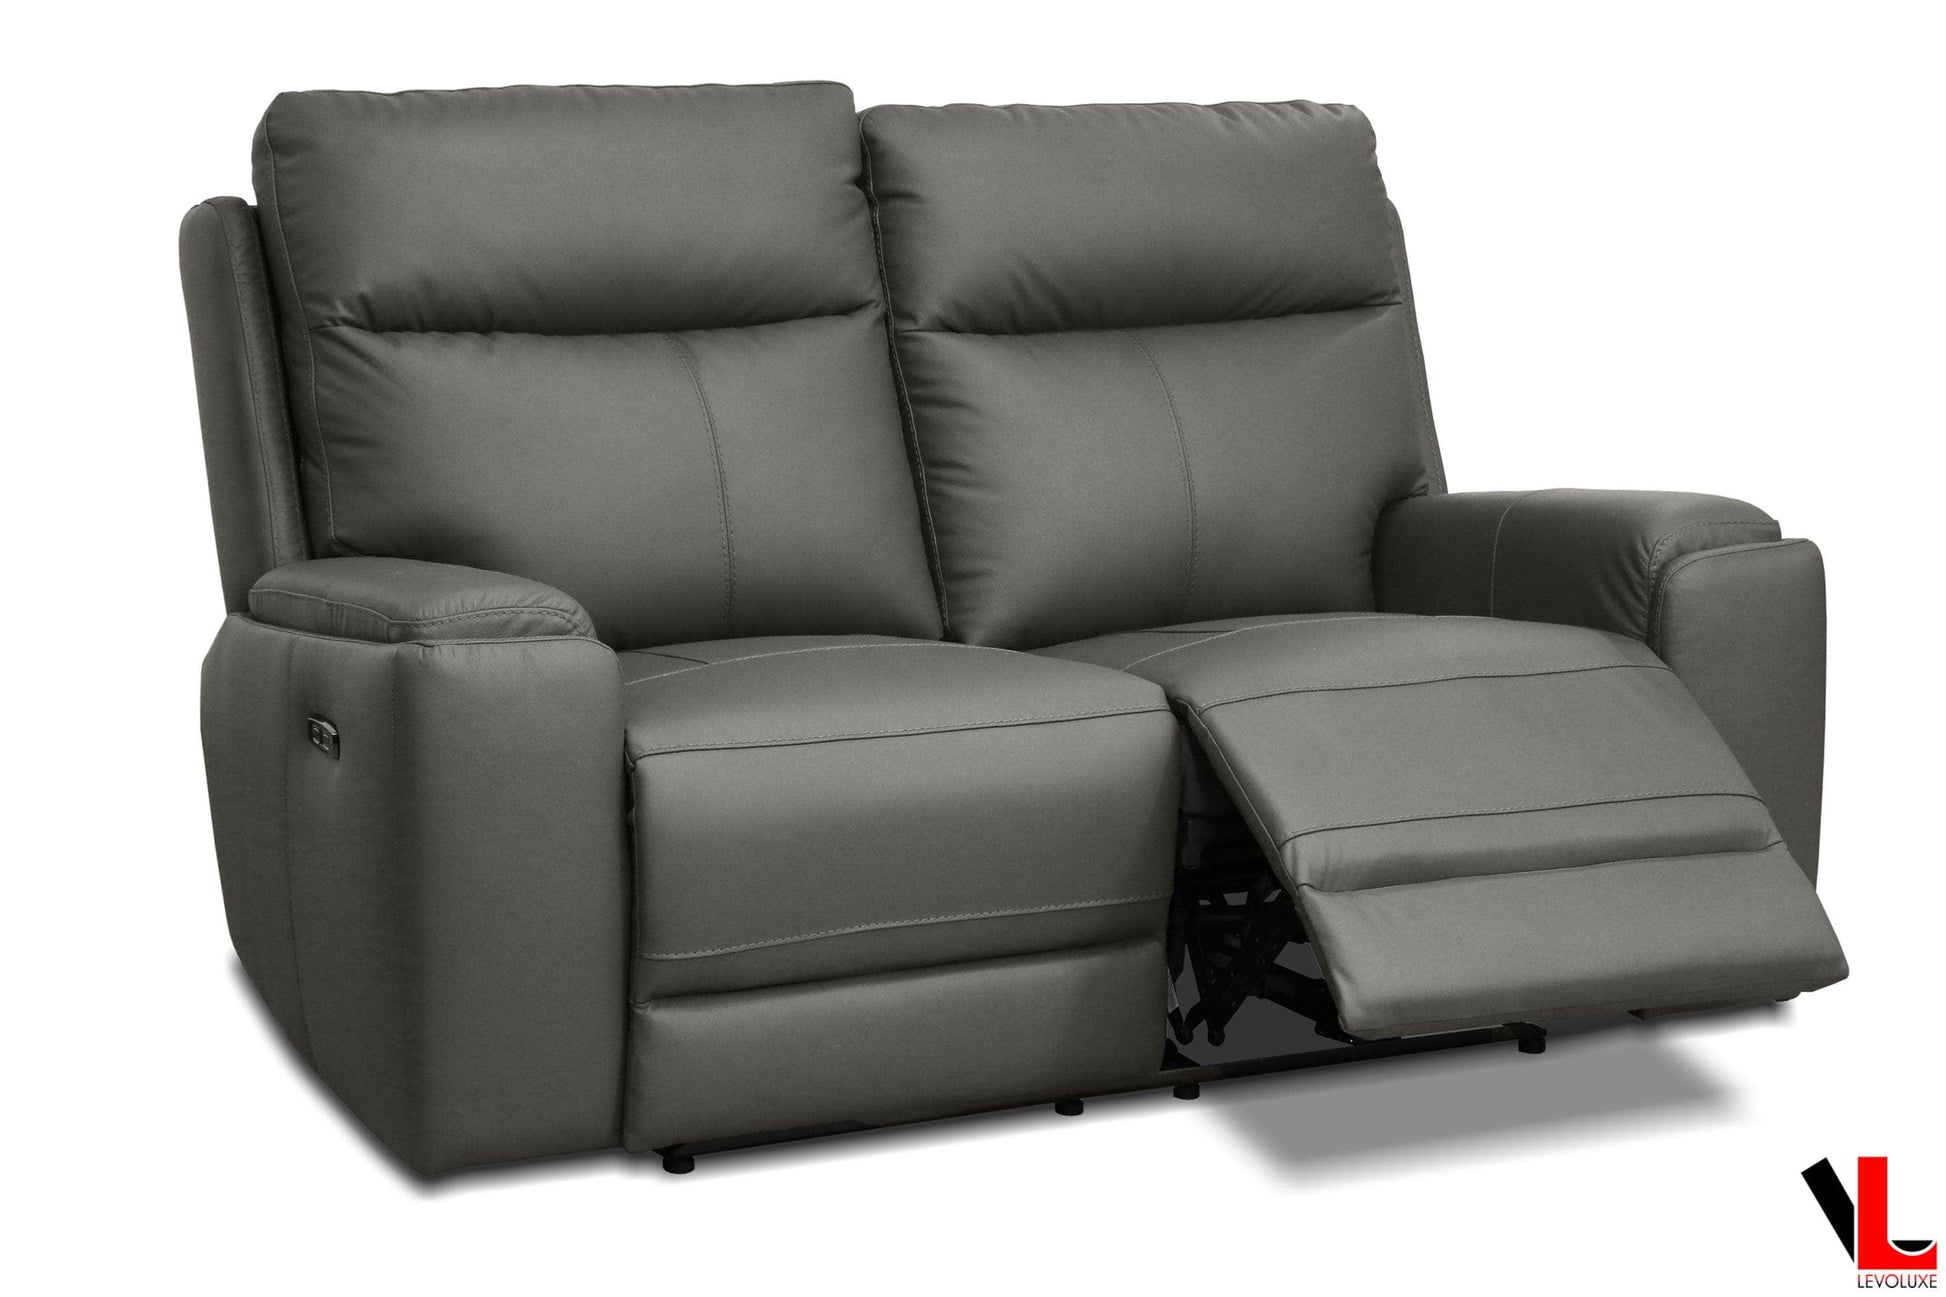 Levoluxe Sofa Set Arlo 3 Piece Power Reclining Sofa, Loveseat, and Chair Set with Power Headrest in Leather Match - Available in 2 Colours